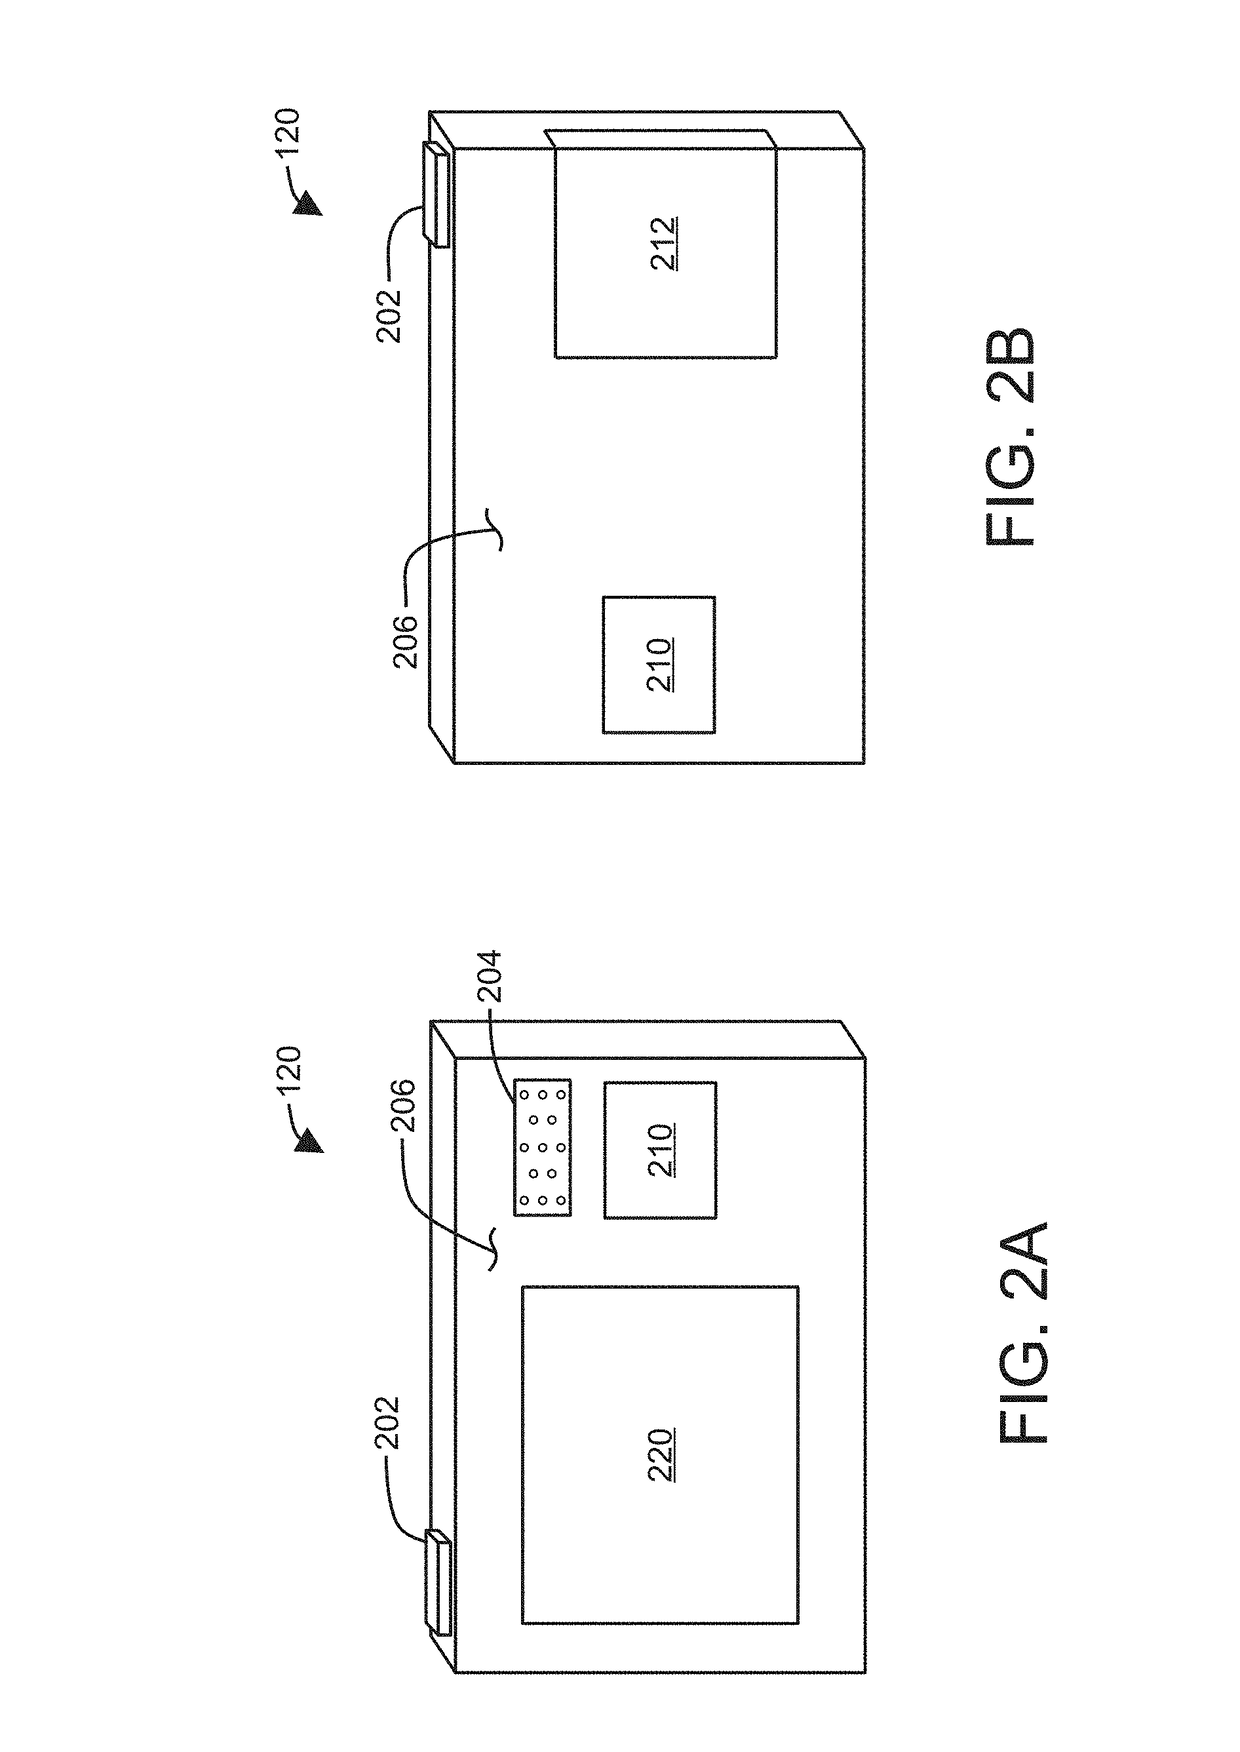 External Medical Device that Identifies a Response Activity